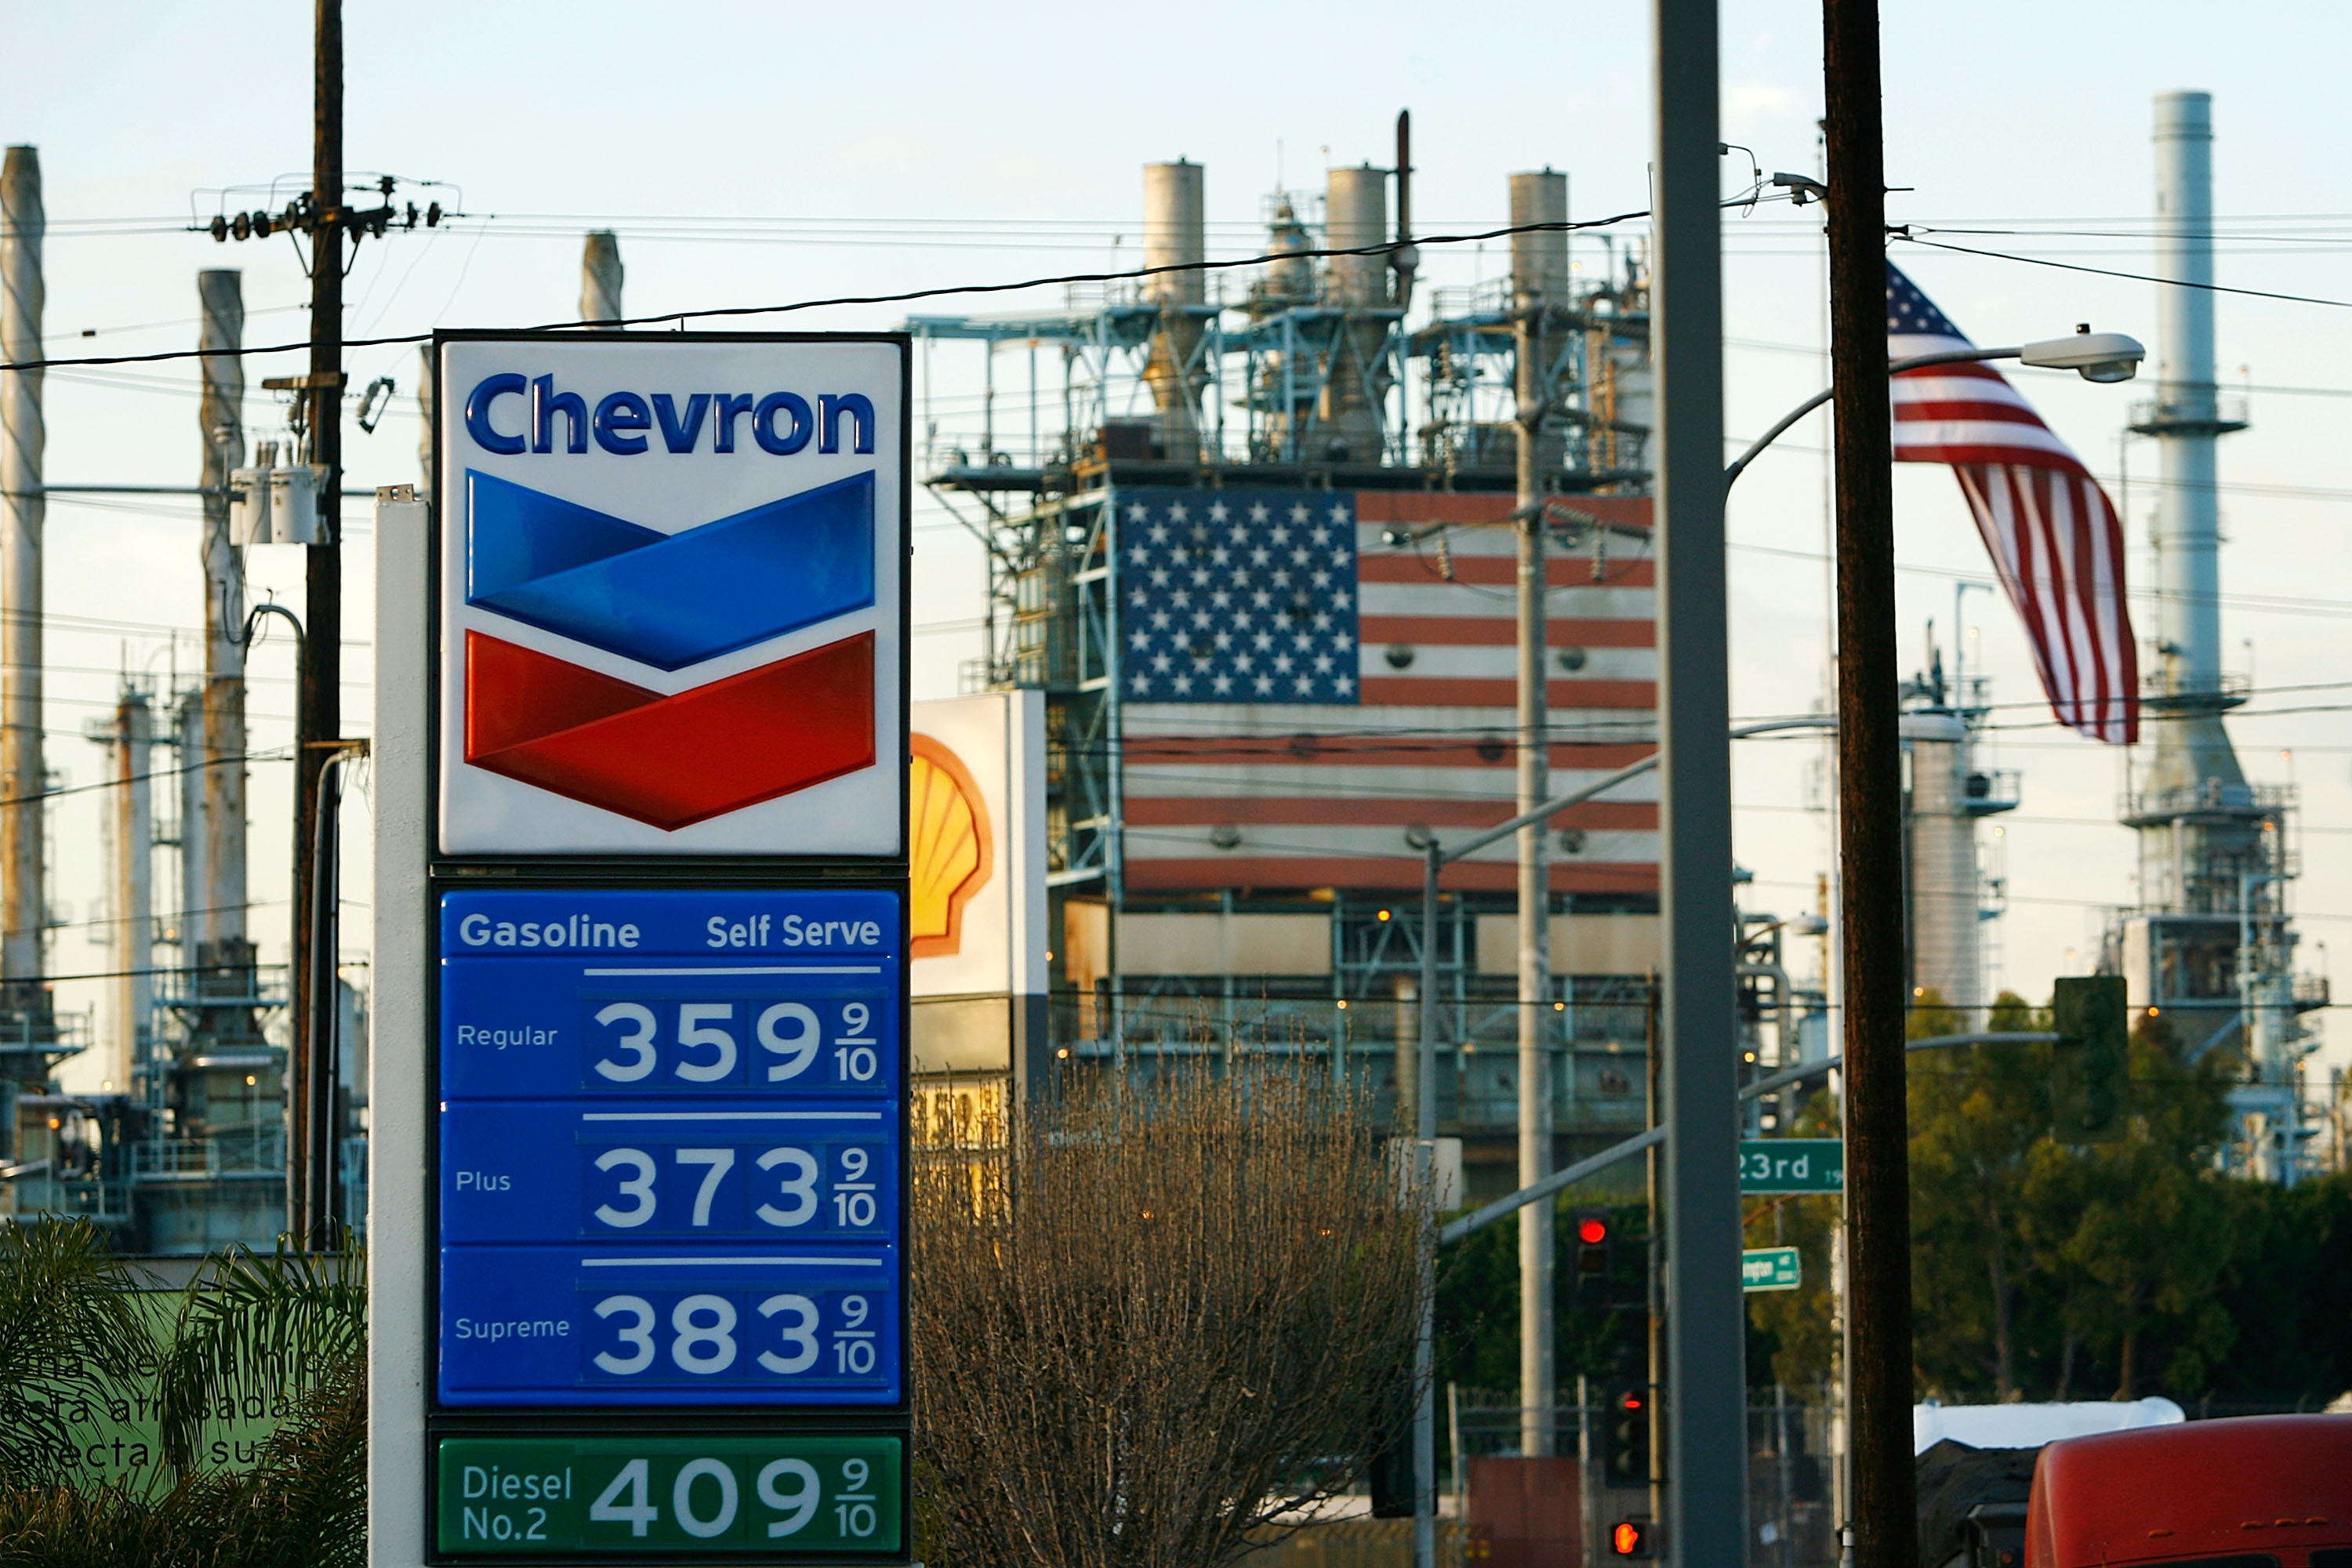 A gas station near the British Petroleum (BP) Arco Wilmington refinery advertises its gas prices after oil hits another new record at $109 a barrel on March 11, 2008 in Wilmington, California. (David McNew&mdash;Getty Images)